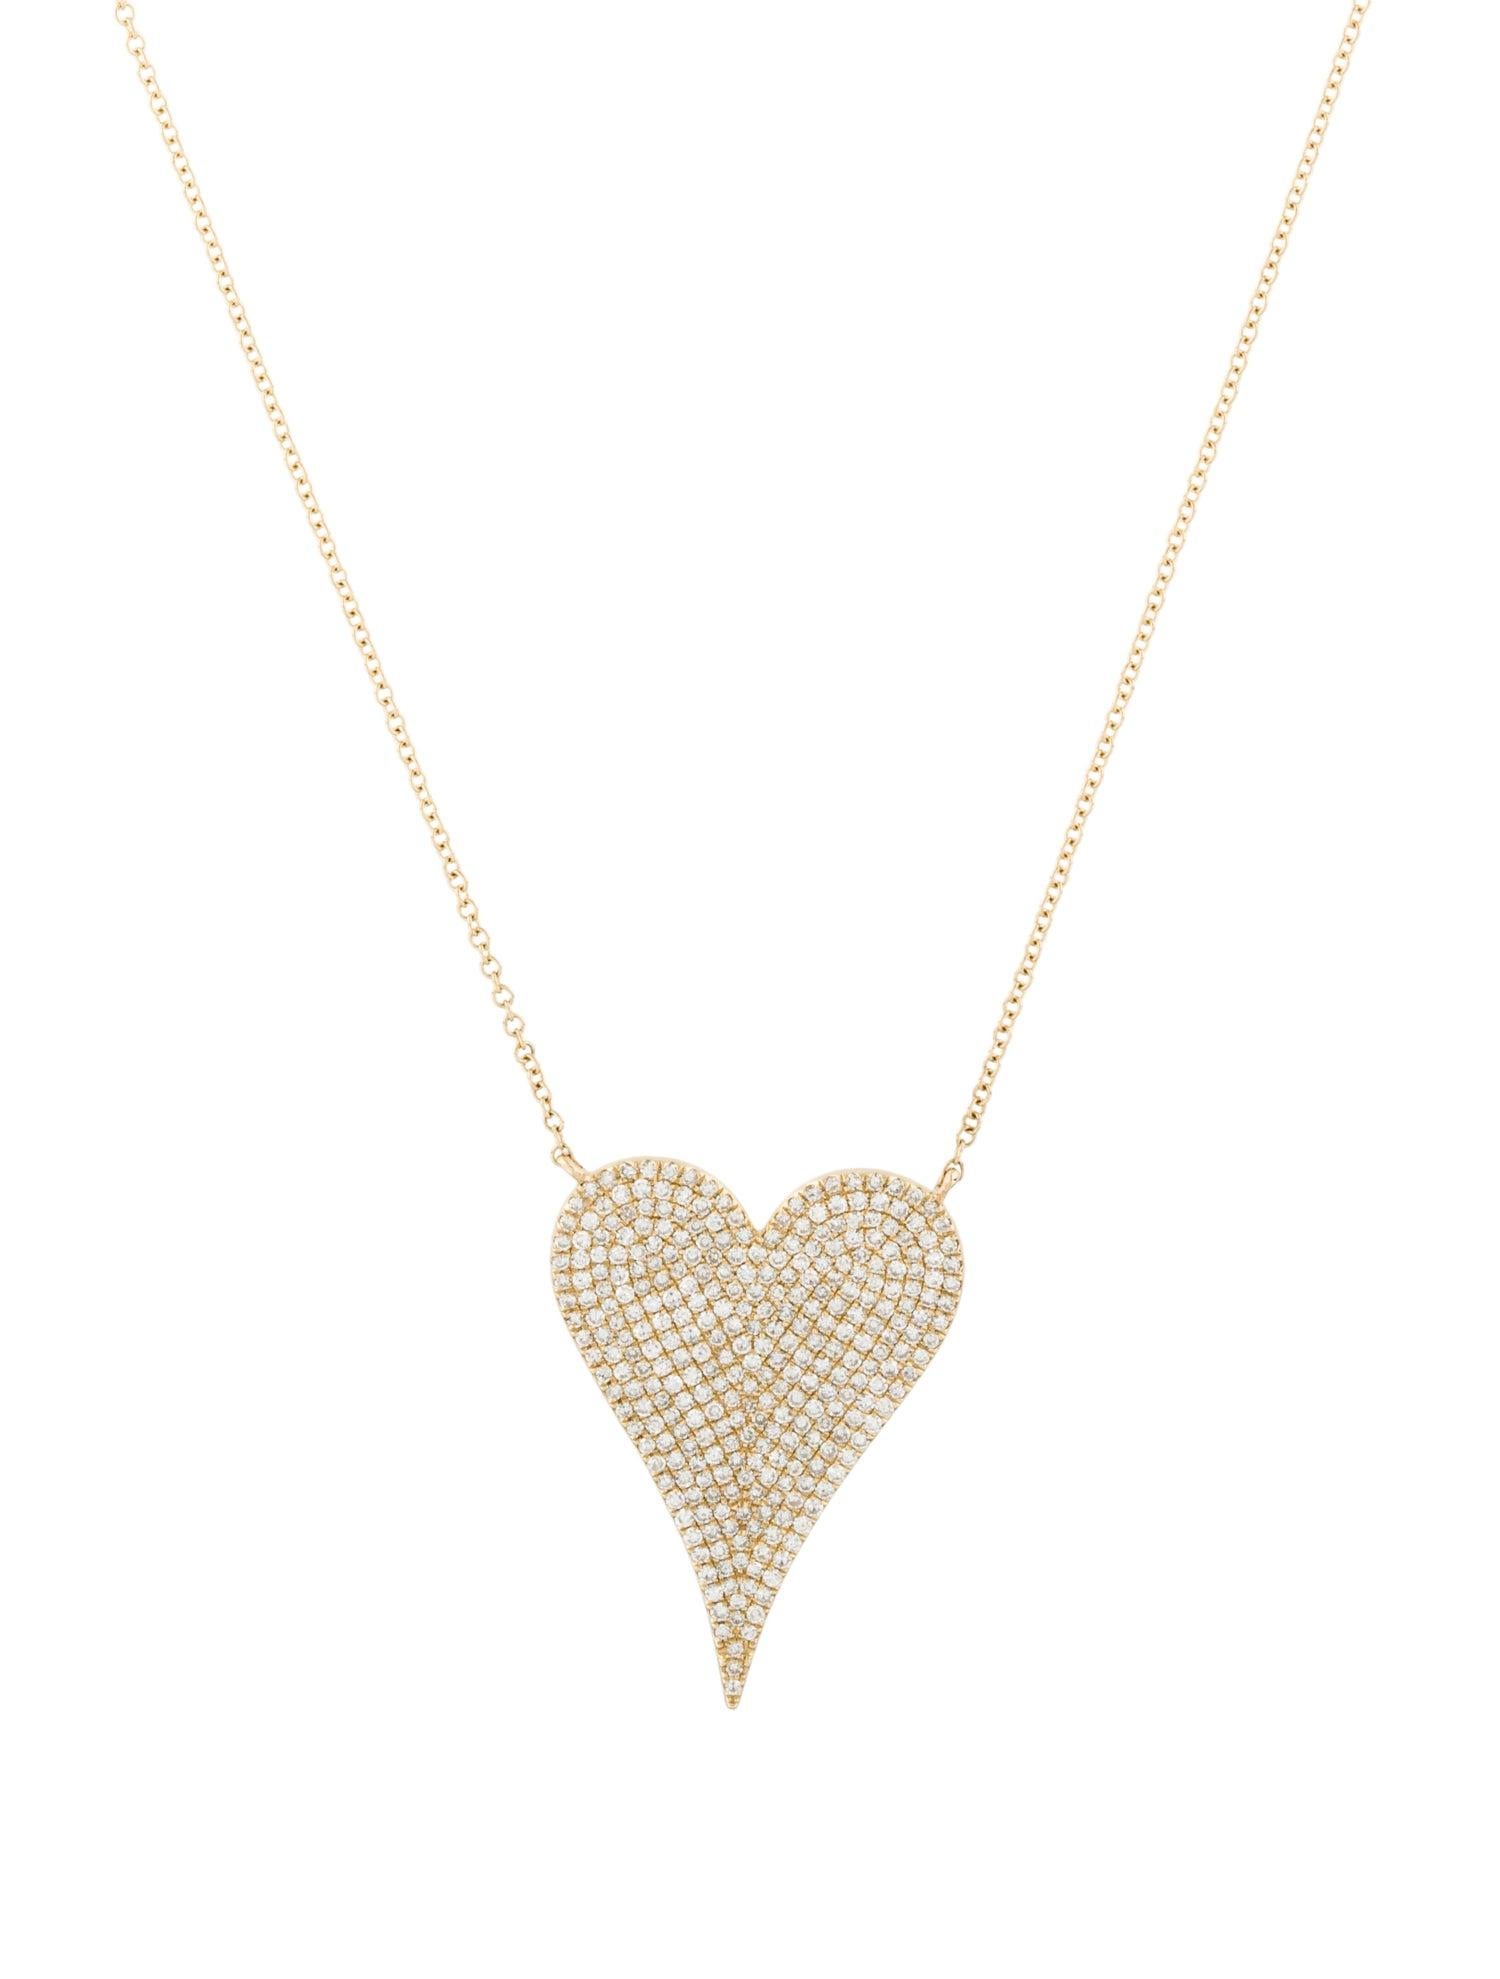 This Stunning & Exotic Pave Diamond Heart Pendant crafted of 14K White Gold features approximately 0.79Ct of Round Natural Diamonds, on a adjustable 16,17 & 18